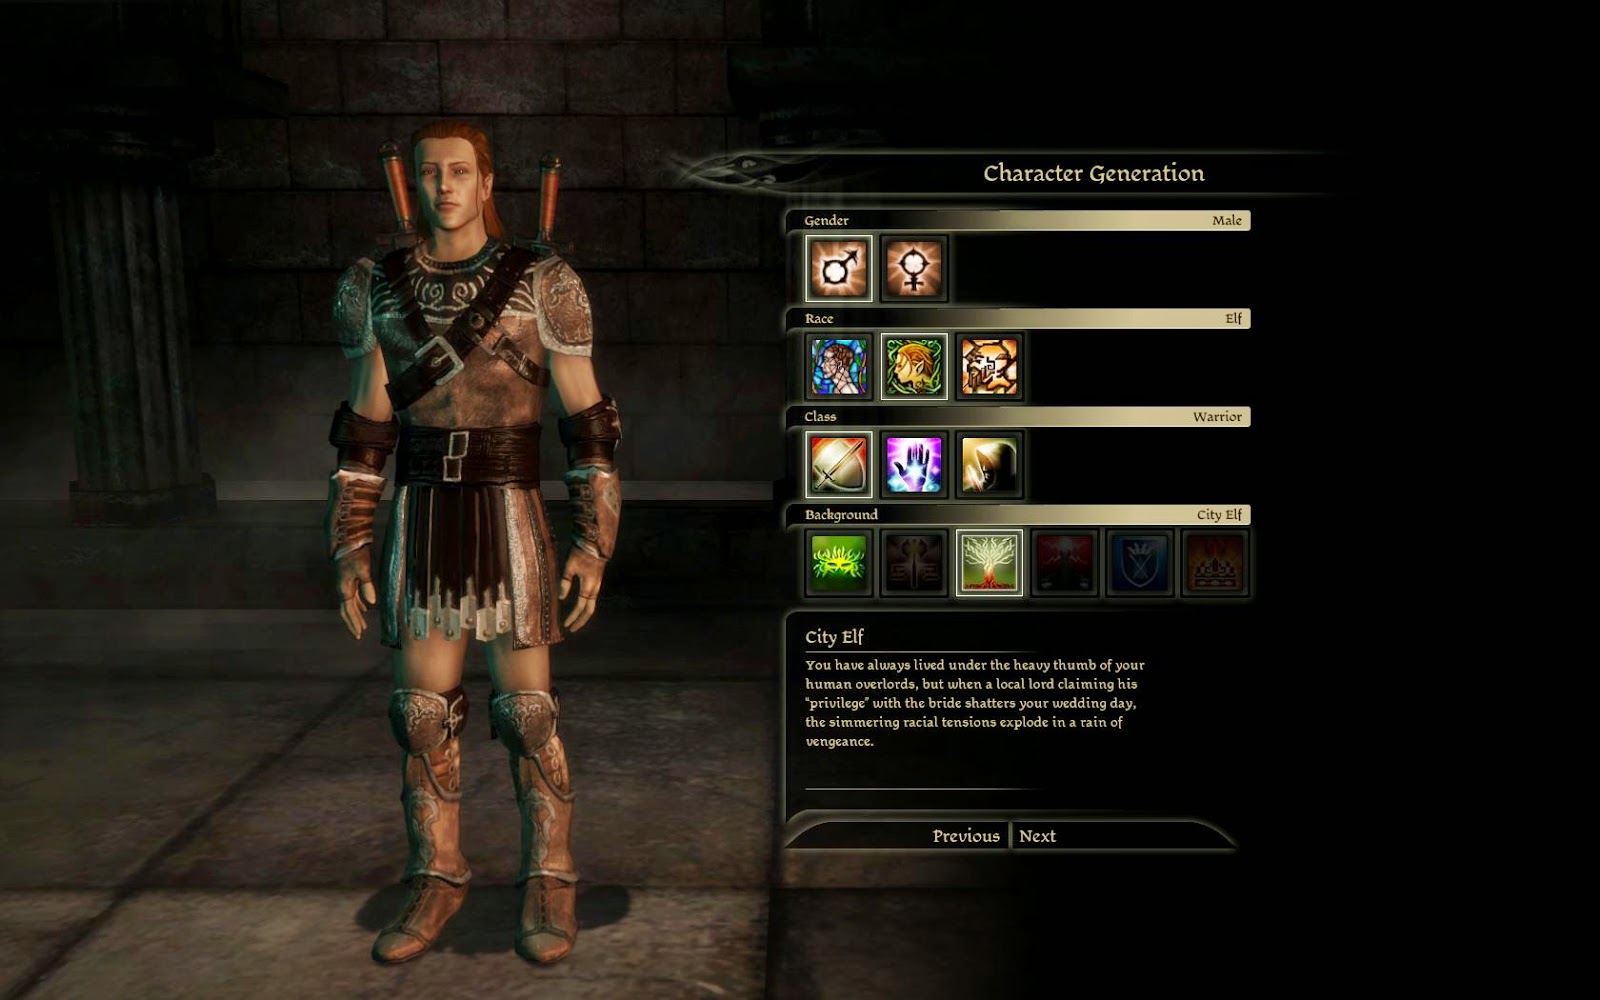 JD's Gaming Blog: The Past and Times of Yore: Dragon Age Origins